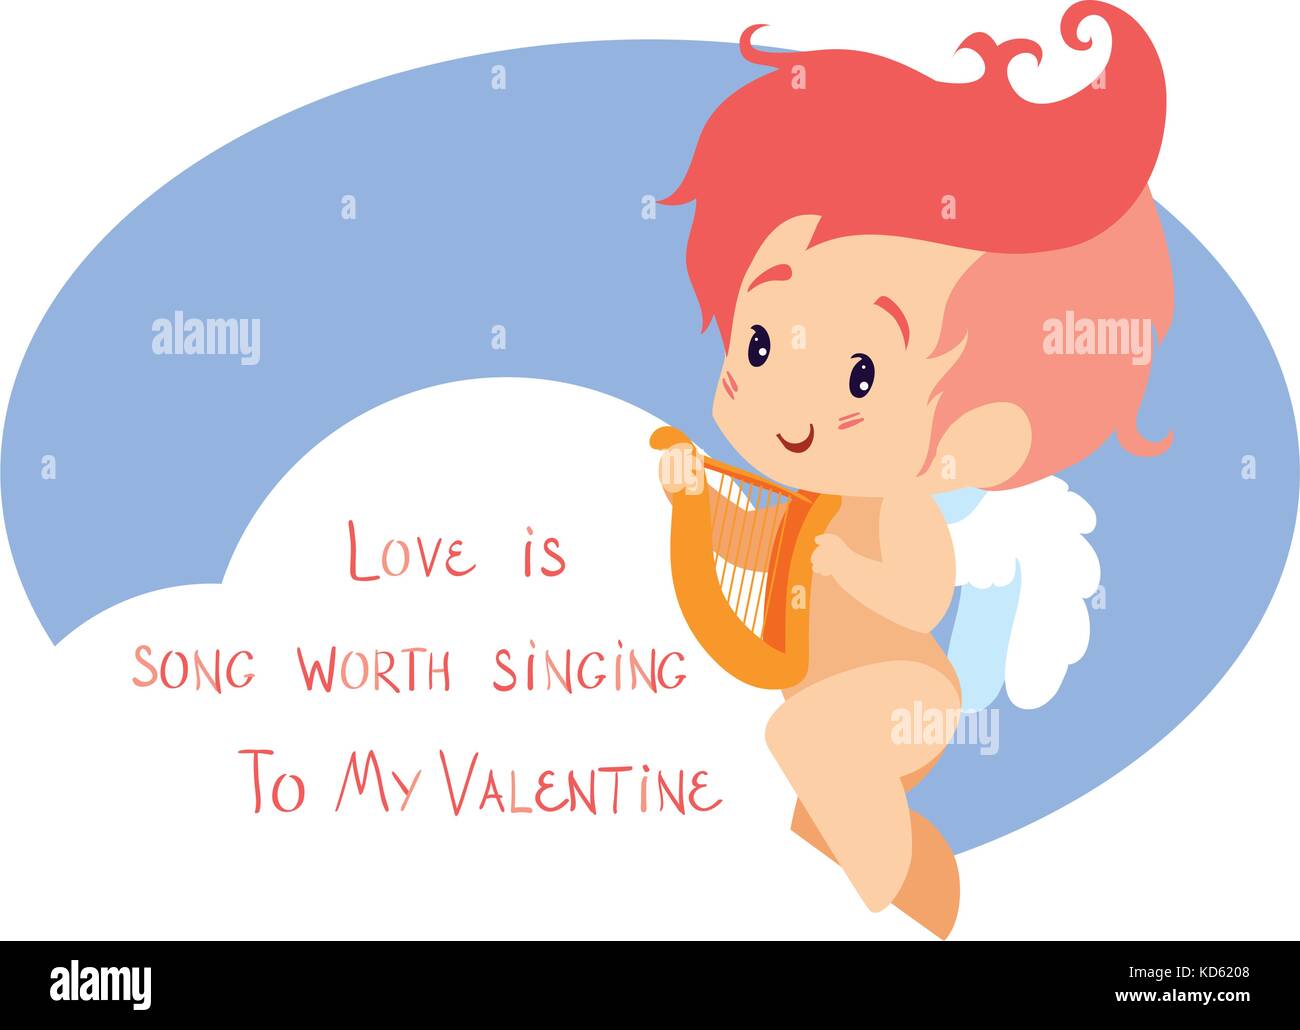 Cupid playing love song music on hurp. Handwritten fun quotation Stock Vector